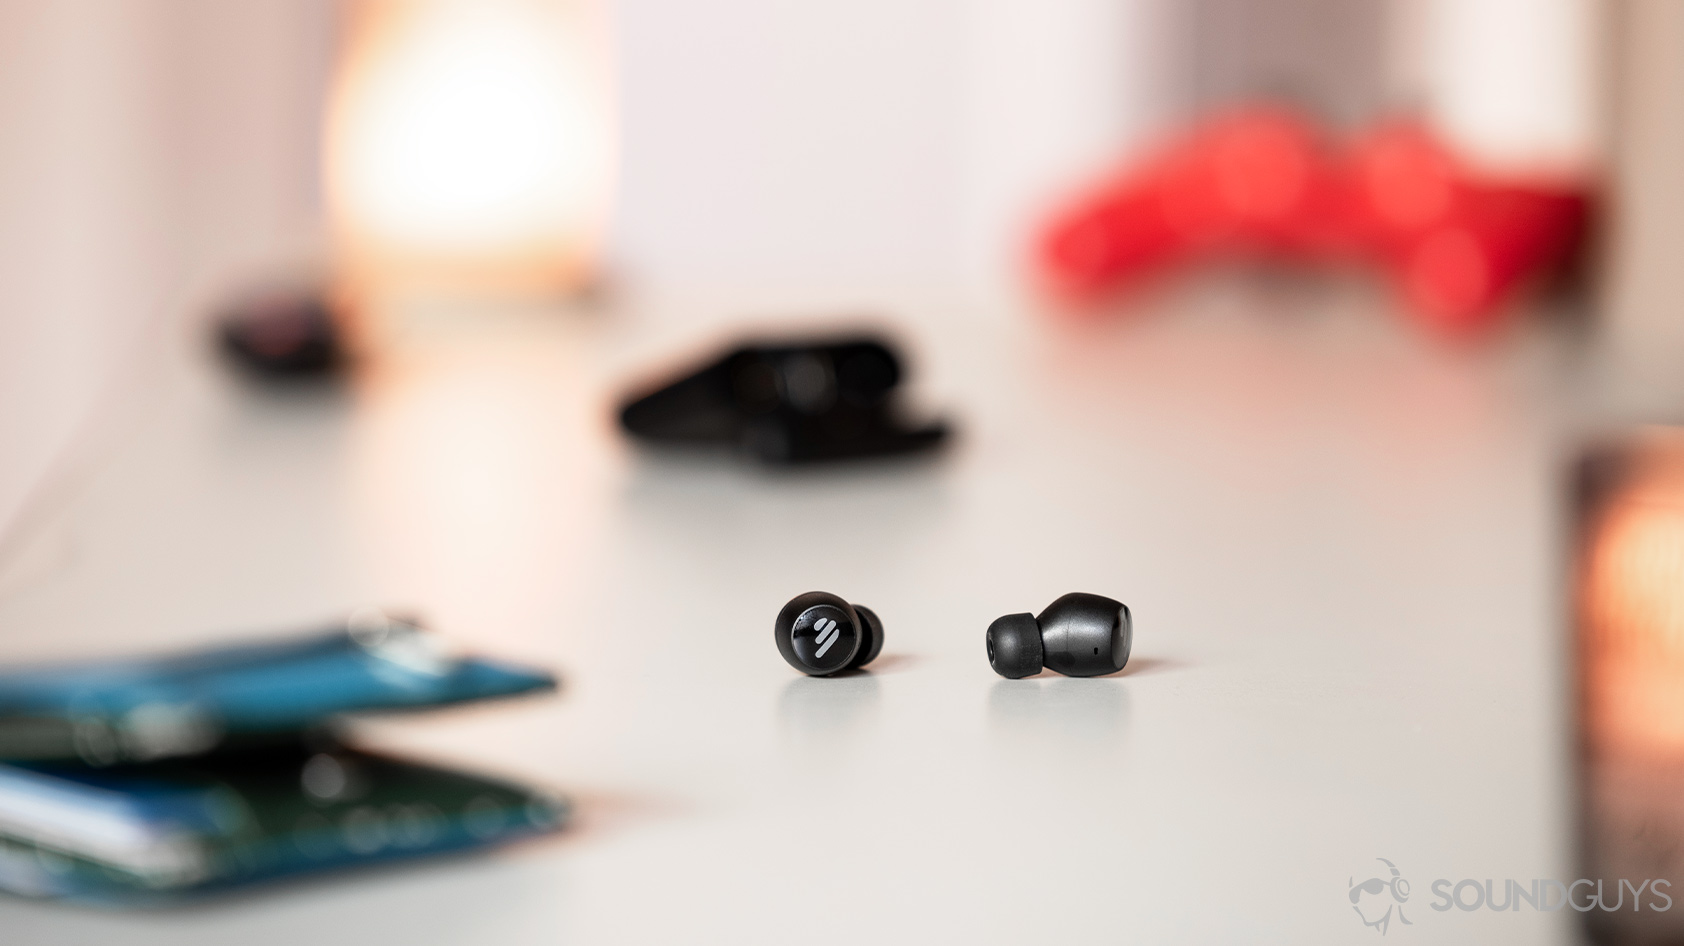 A picture of the Edifier TWS6 true wireless earbuds on a cream-colored coffee table with candles in the foreground and background.